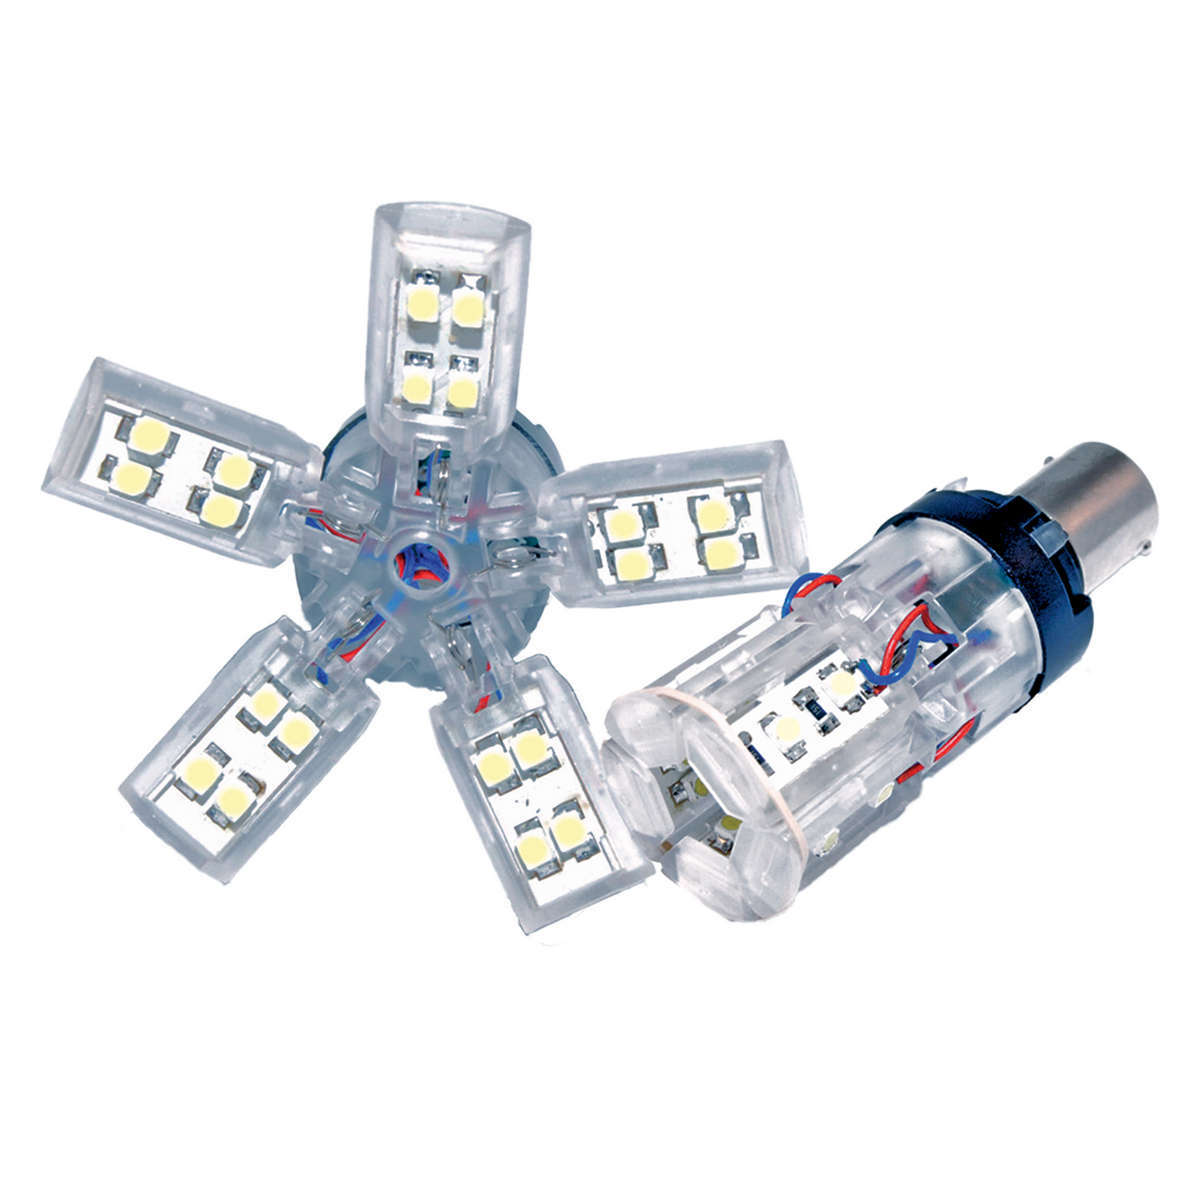 ORACLE LIGHTING 1156 15 LED 3 Chip Spider Bulb Single